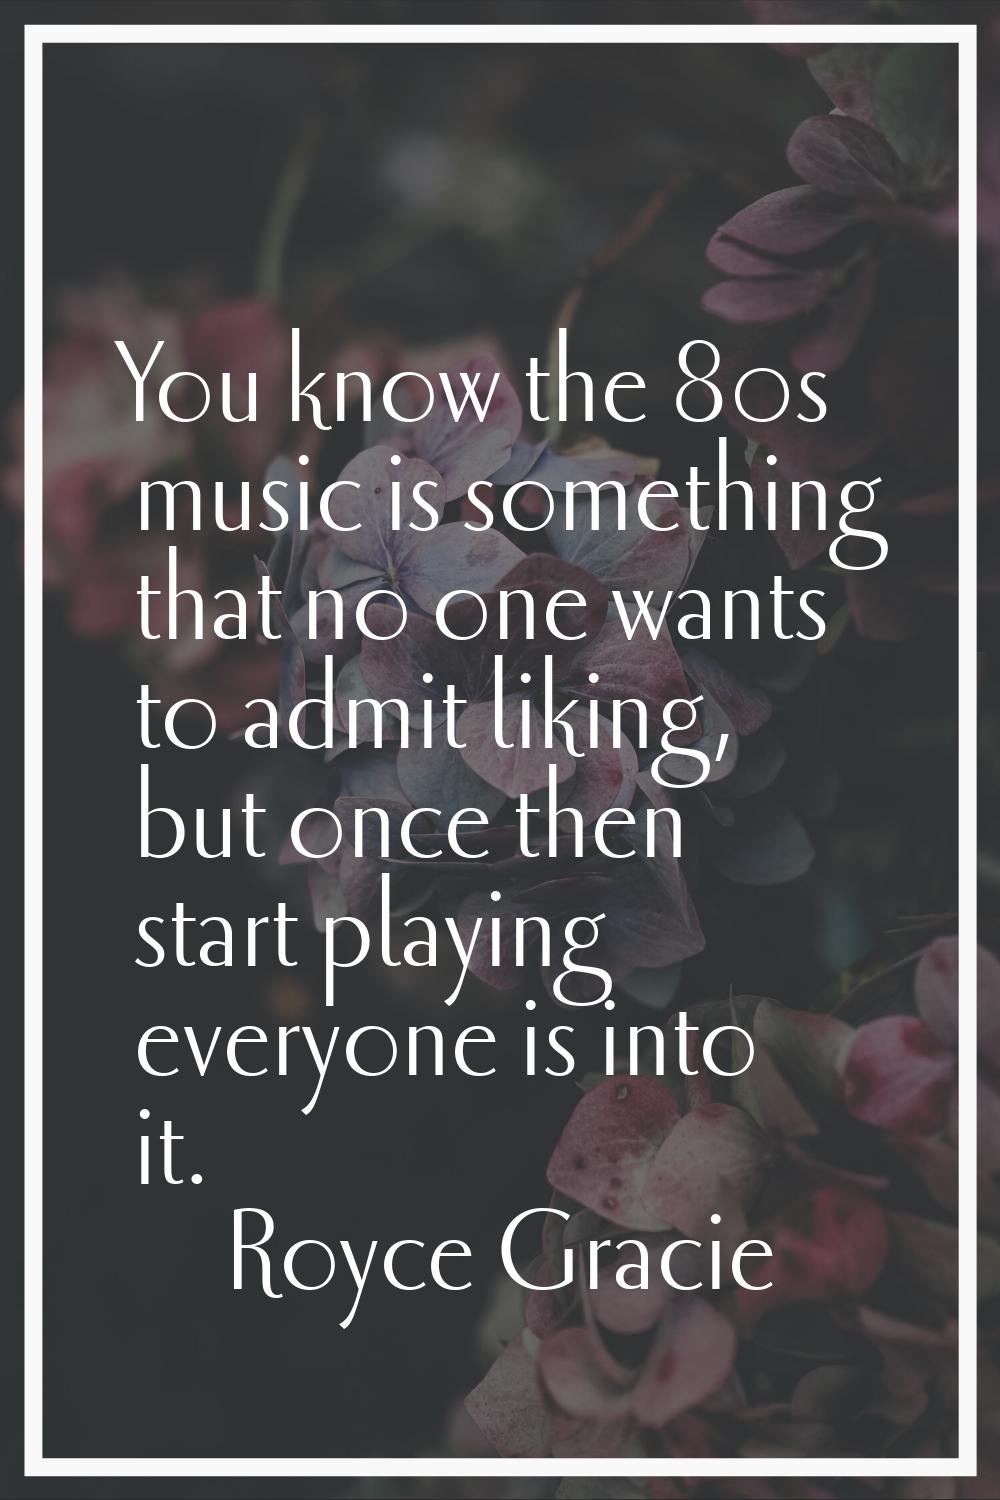 You know the 80s music is something that no one wants to admit liking, but once then start playing 